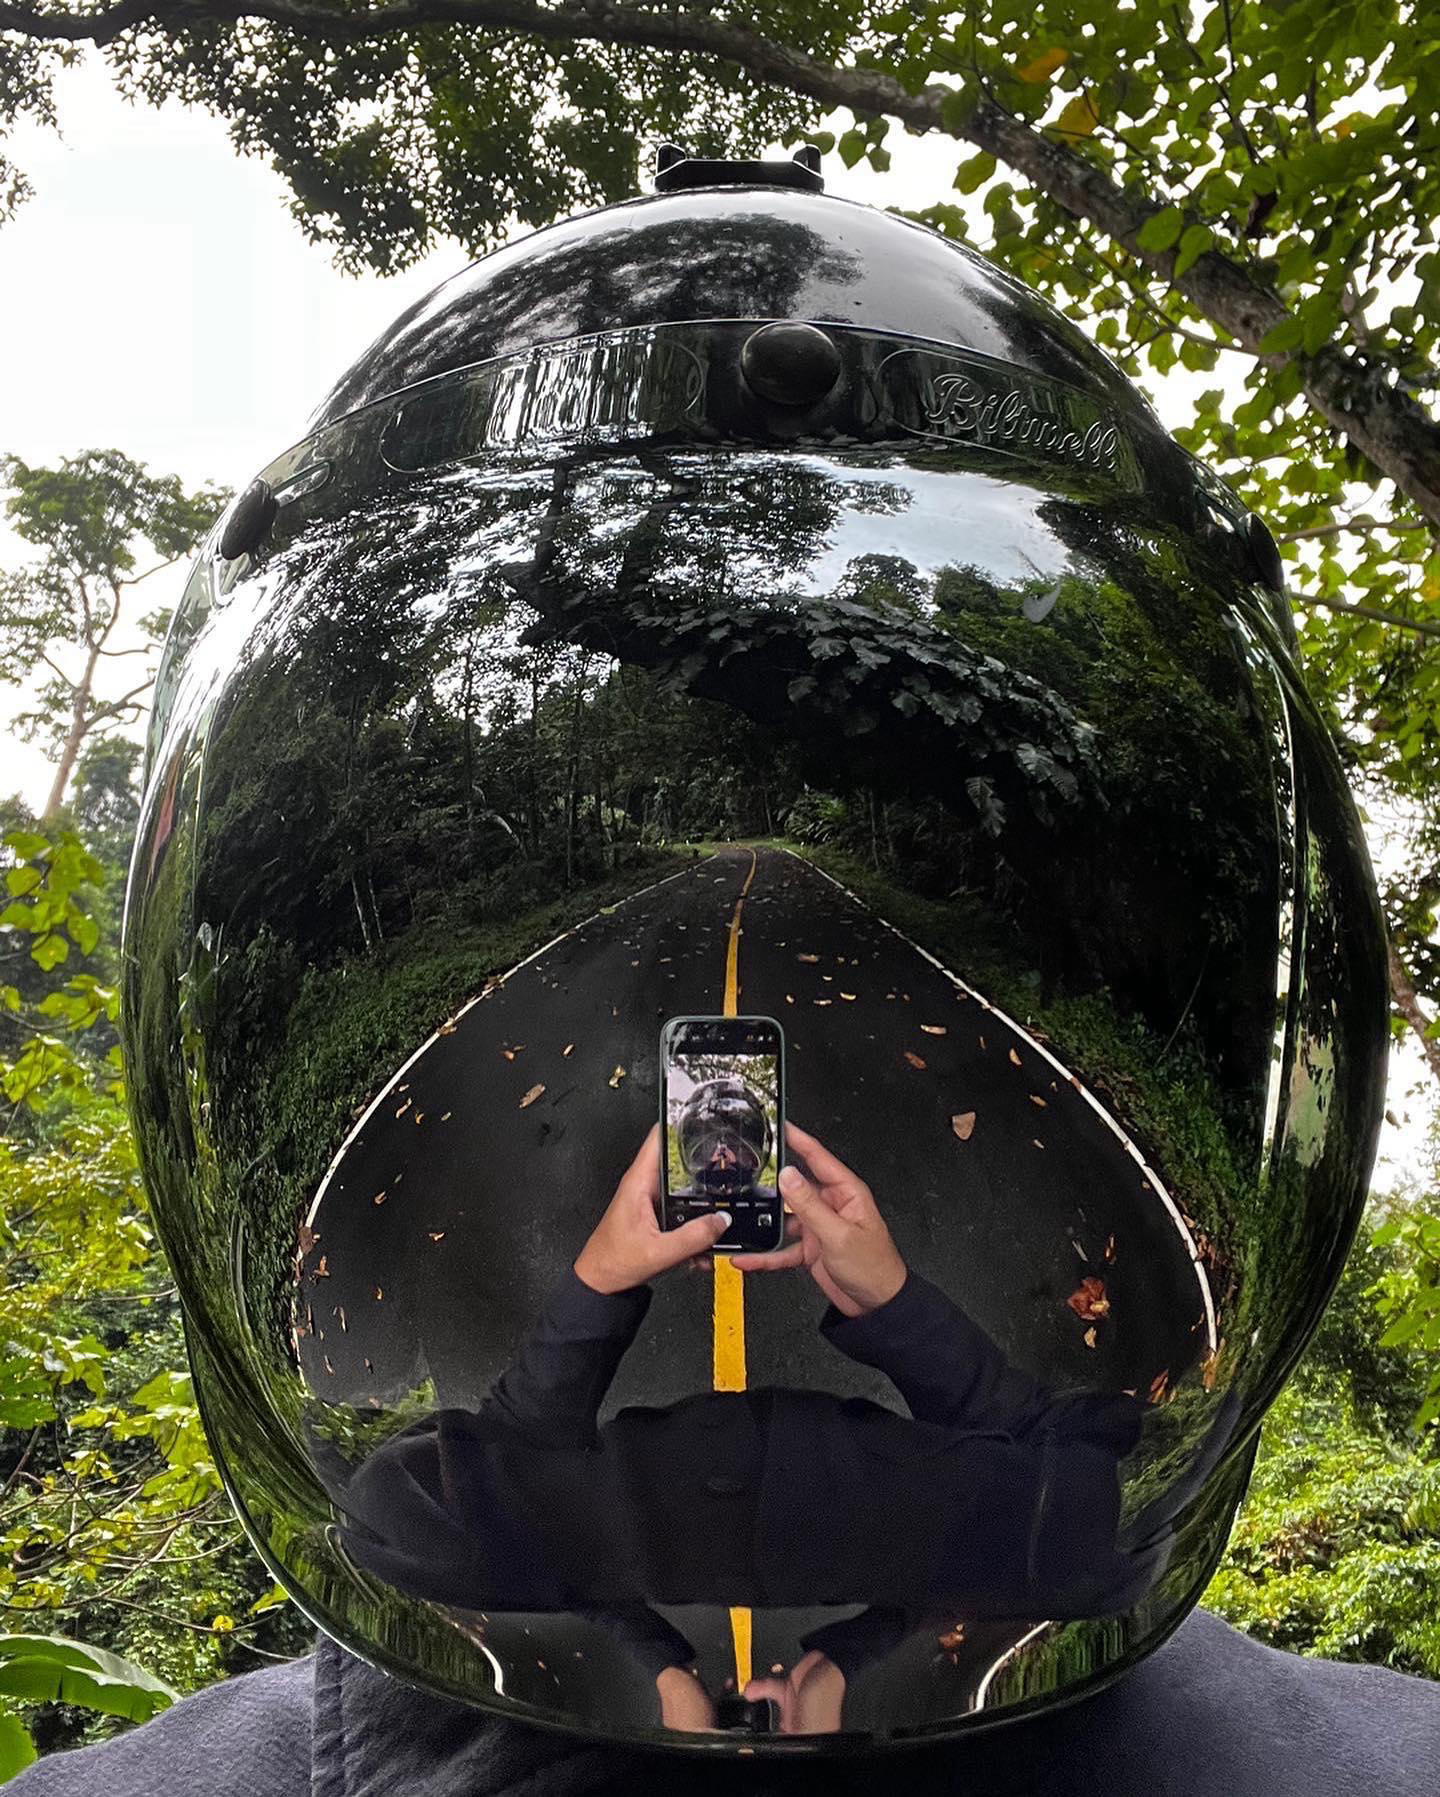 apple - I like playing with the reflection of my helmet in the front camera to see the forest aroun